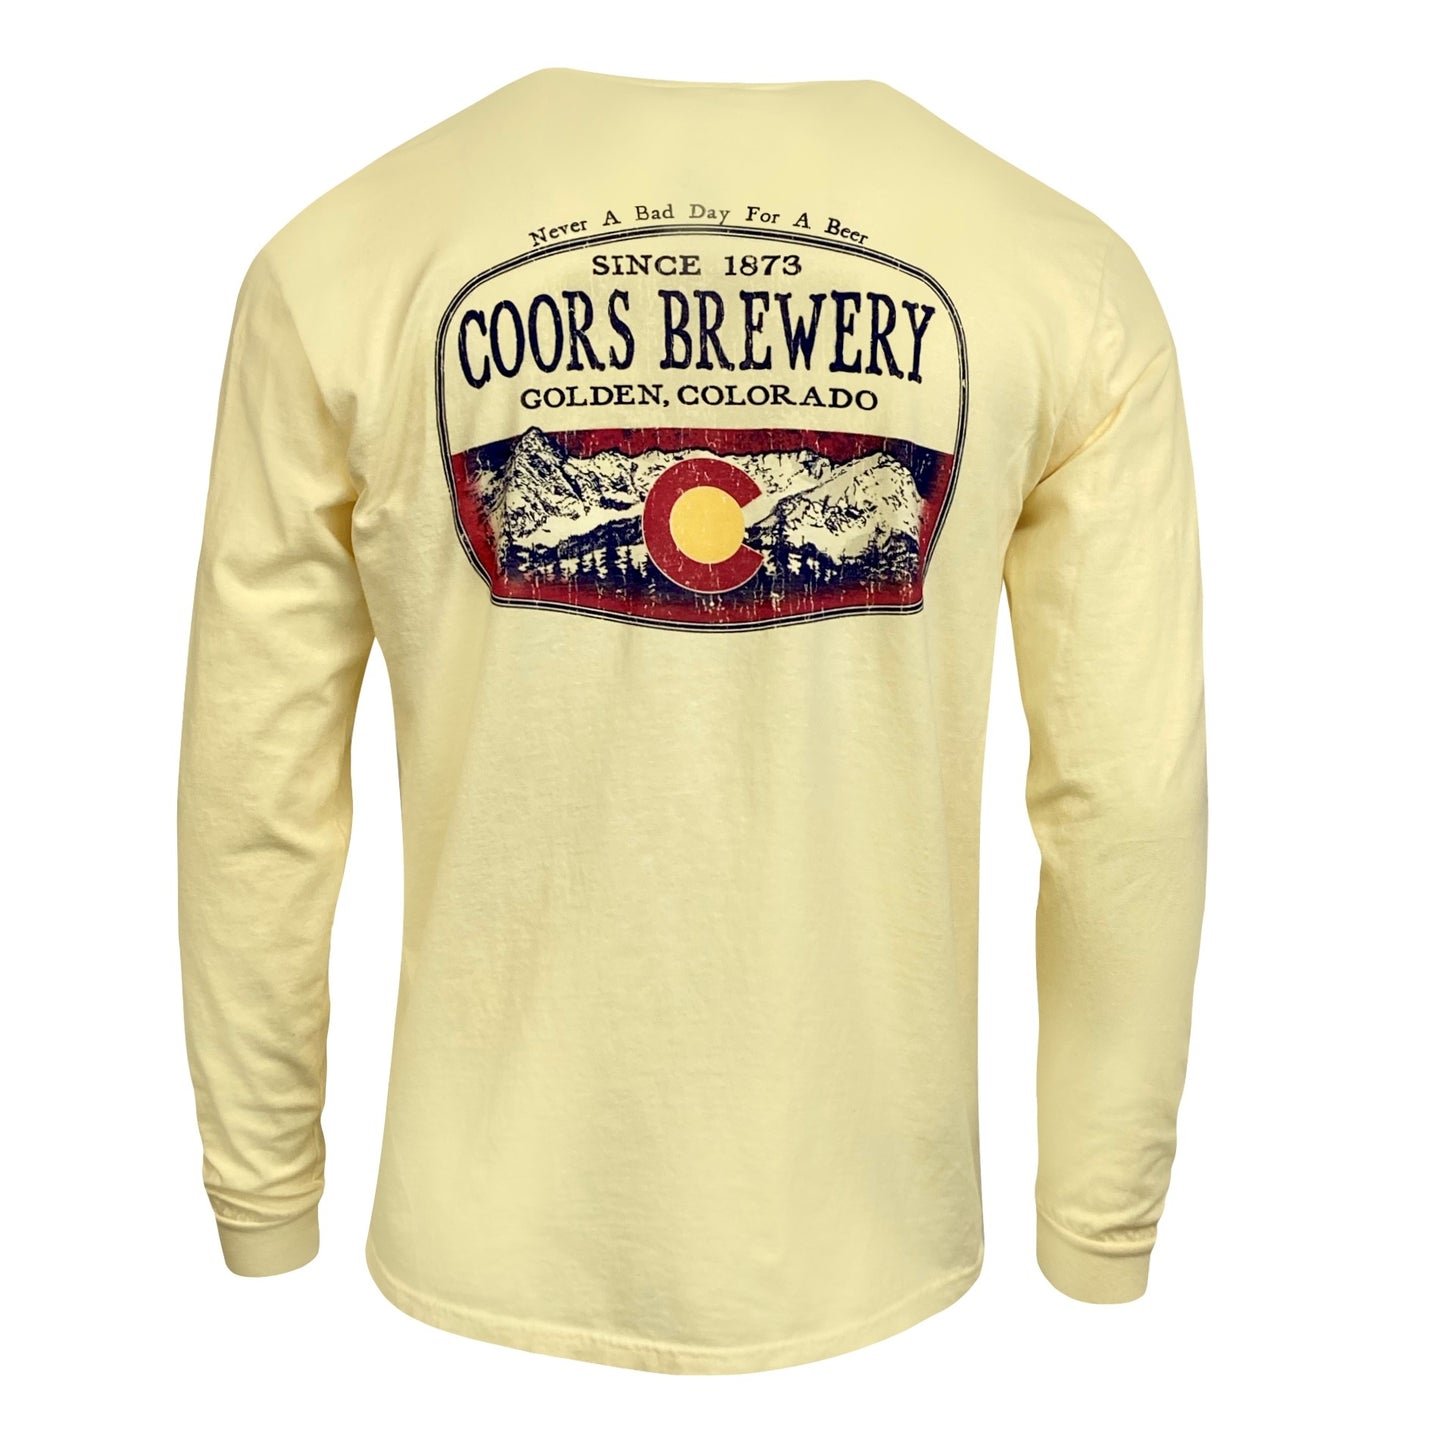 Never a Bad Day for a Beer Long Sleeve Tee